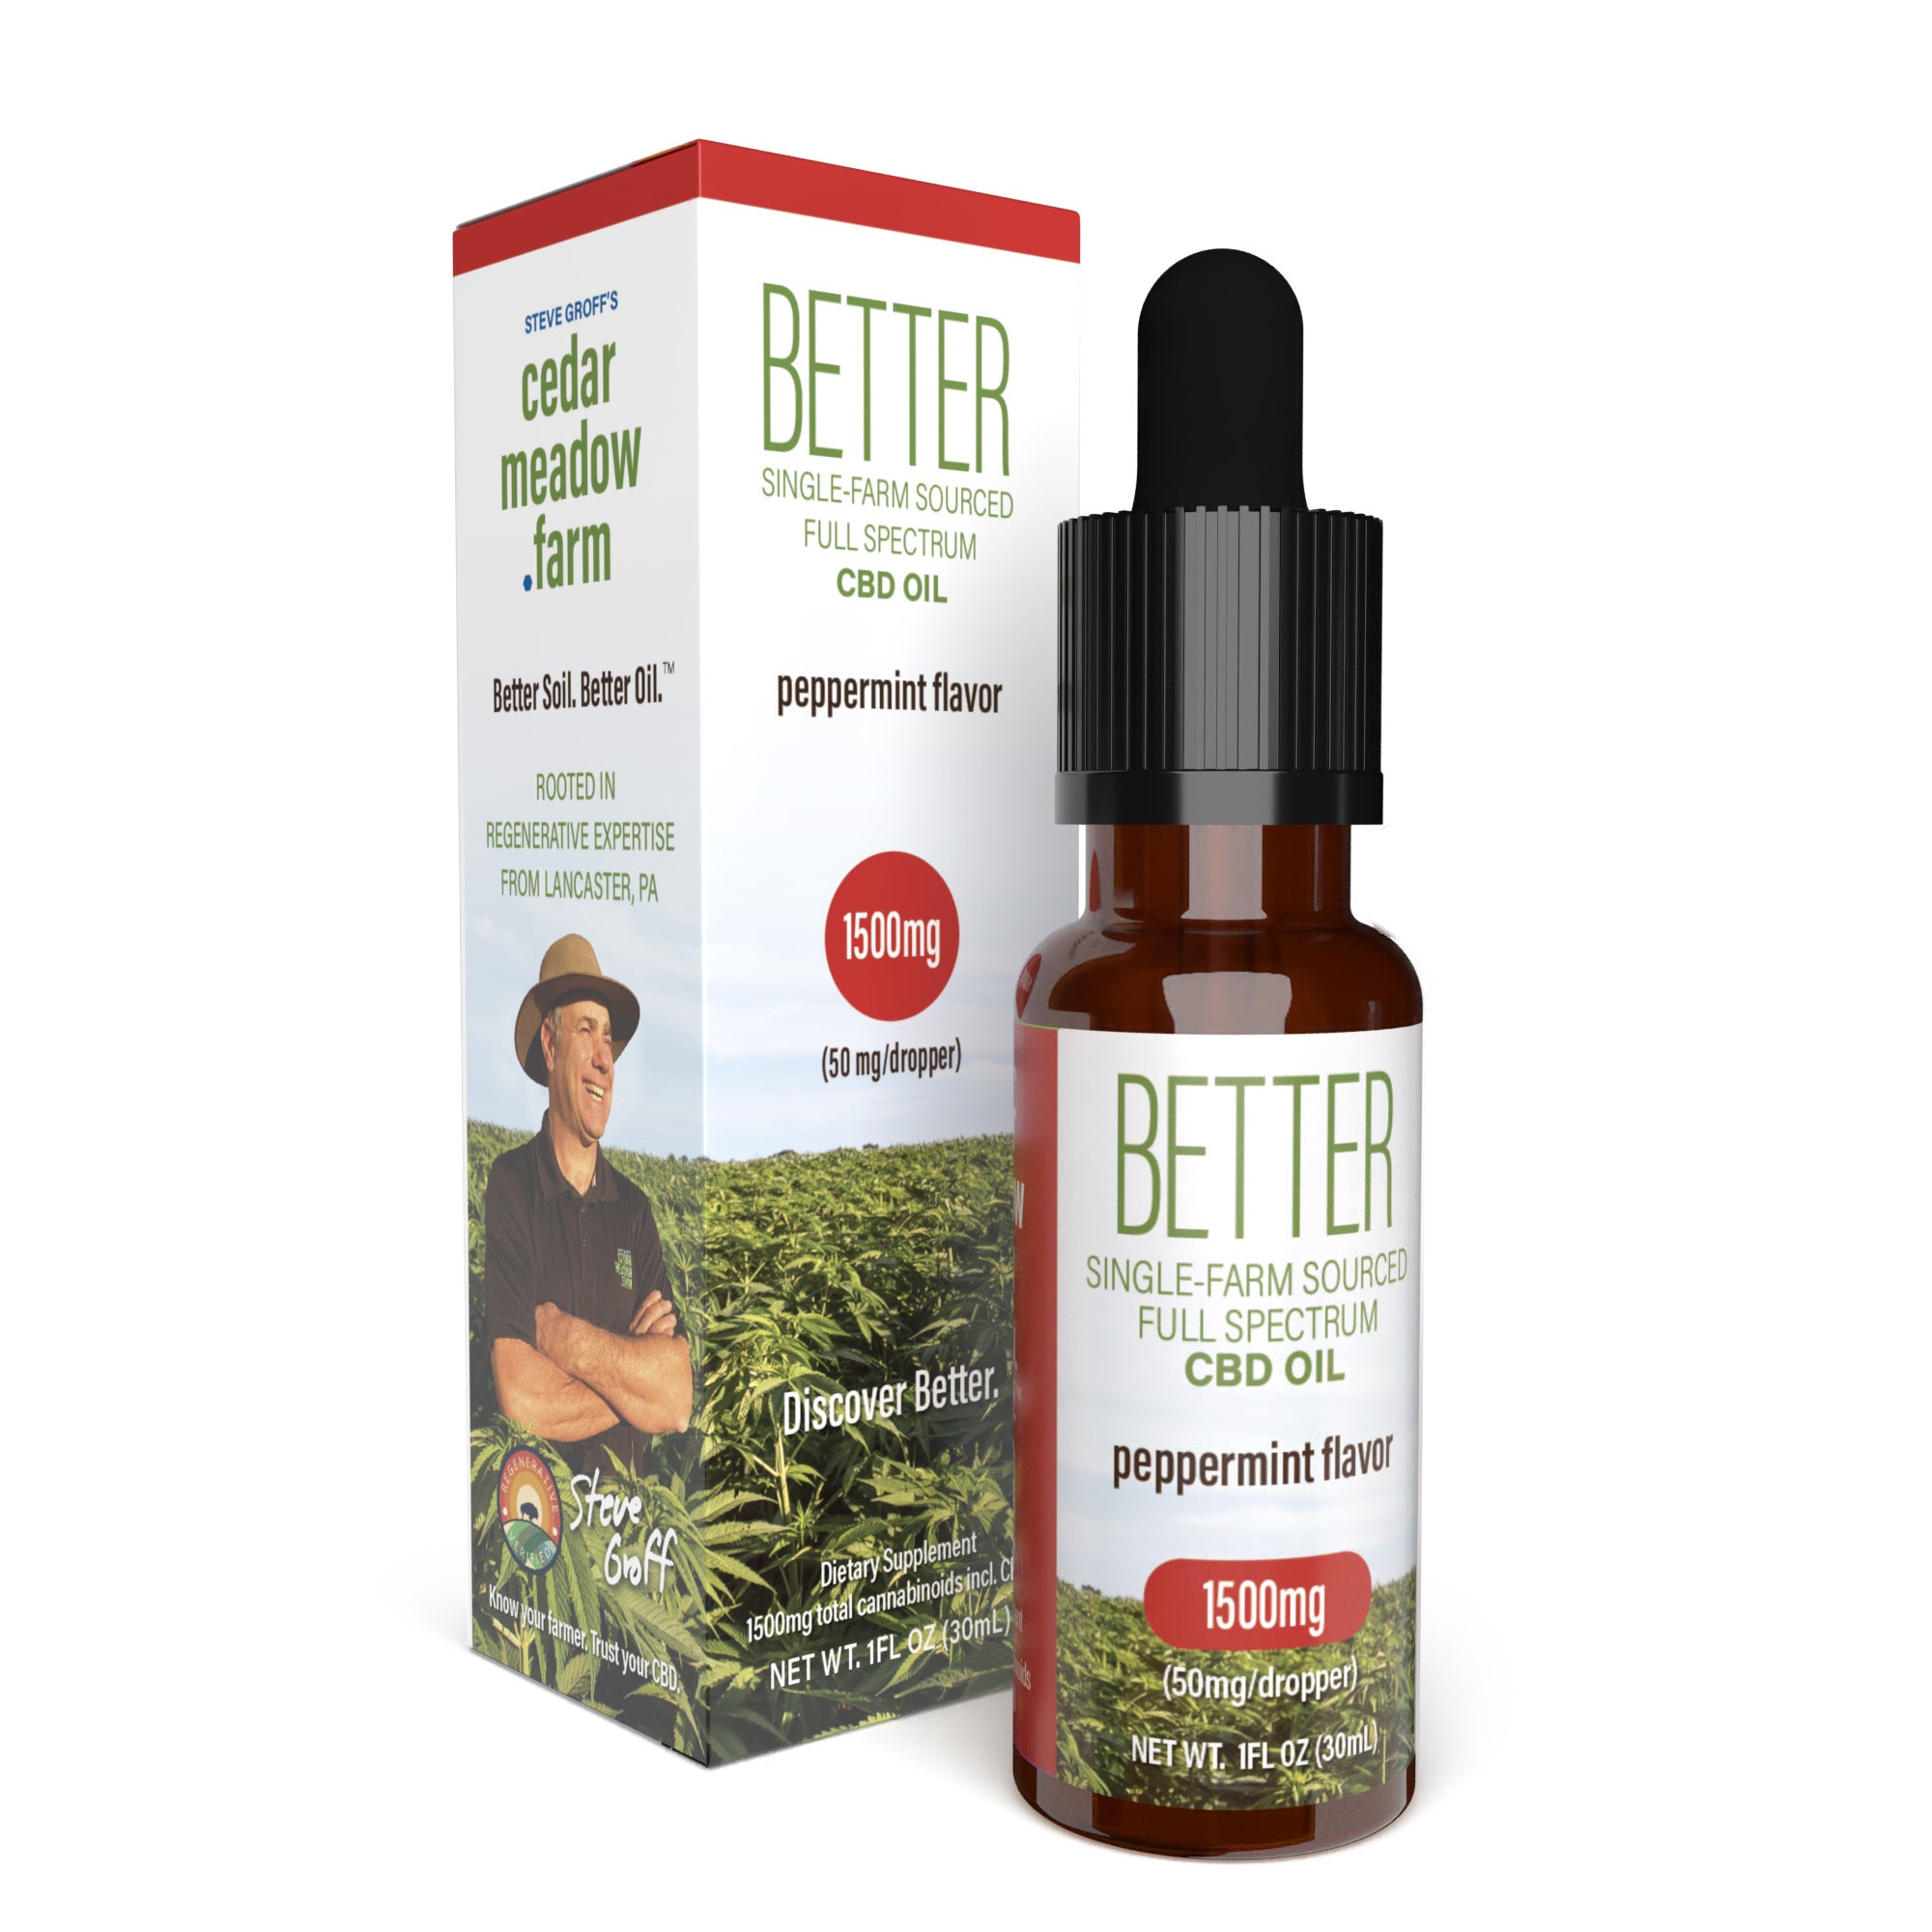 CBD Oil Peppermint Flavor-A crisp new look for the same incredible oil that you've come to love!We made BETTER just for you. Full Spectrum: All of the naturally-occurring compounds in the -Cedar Meadow Farm